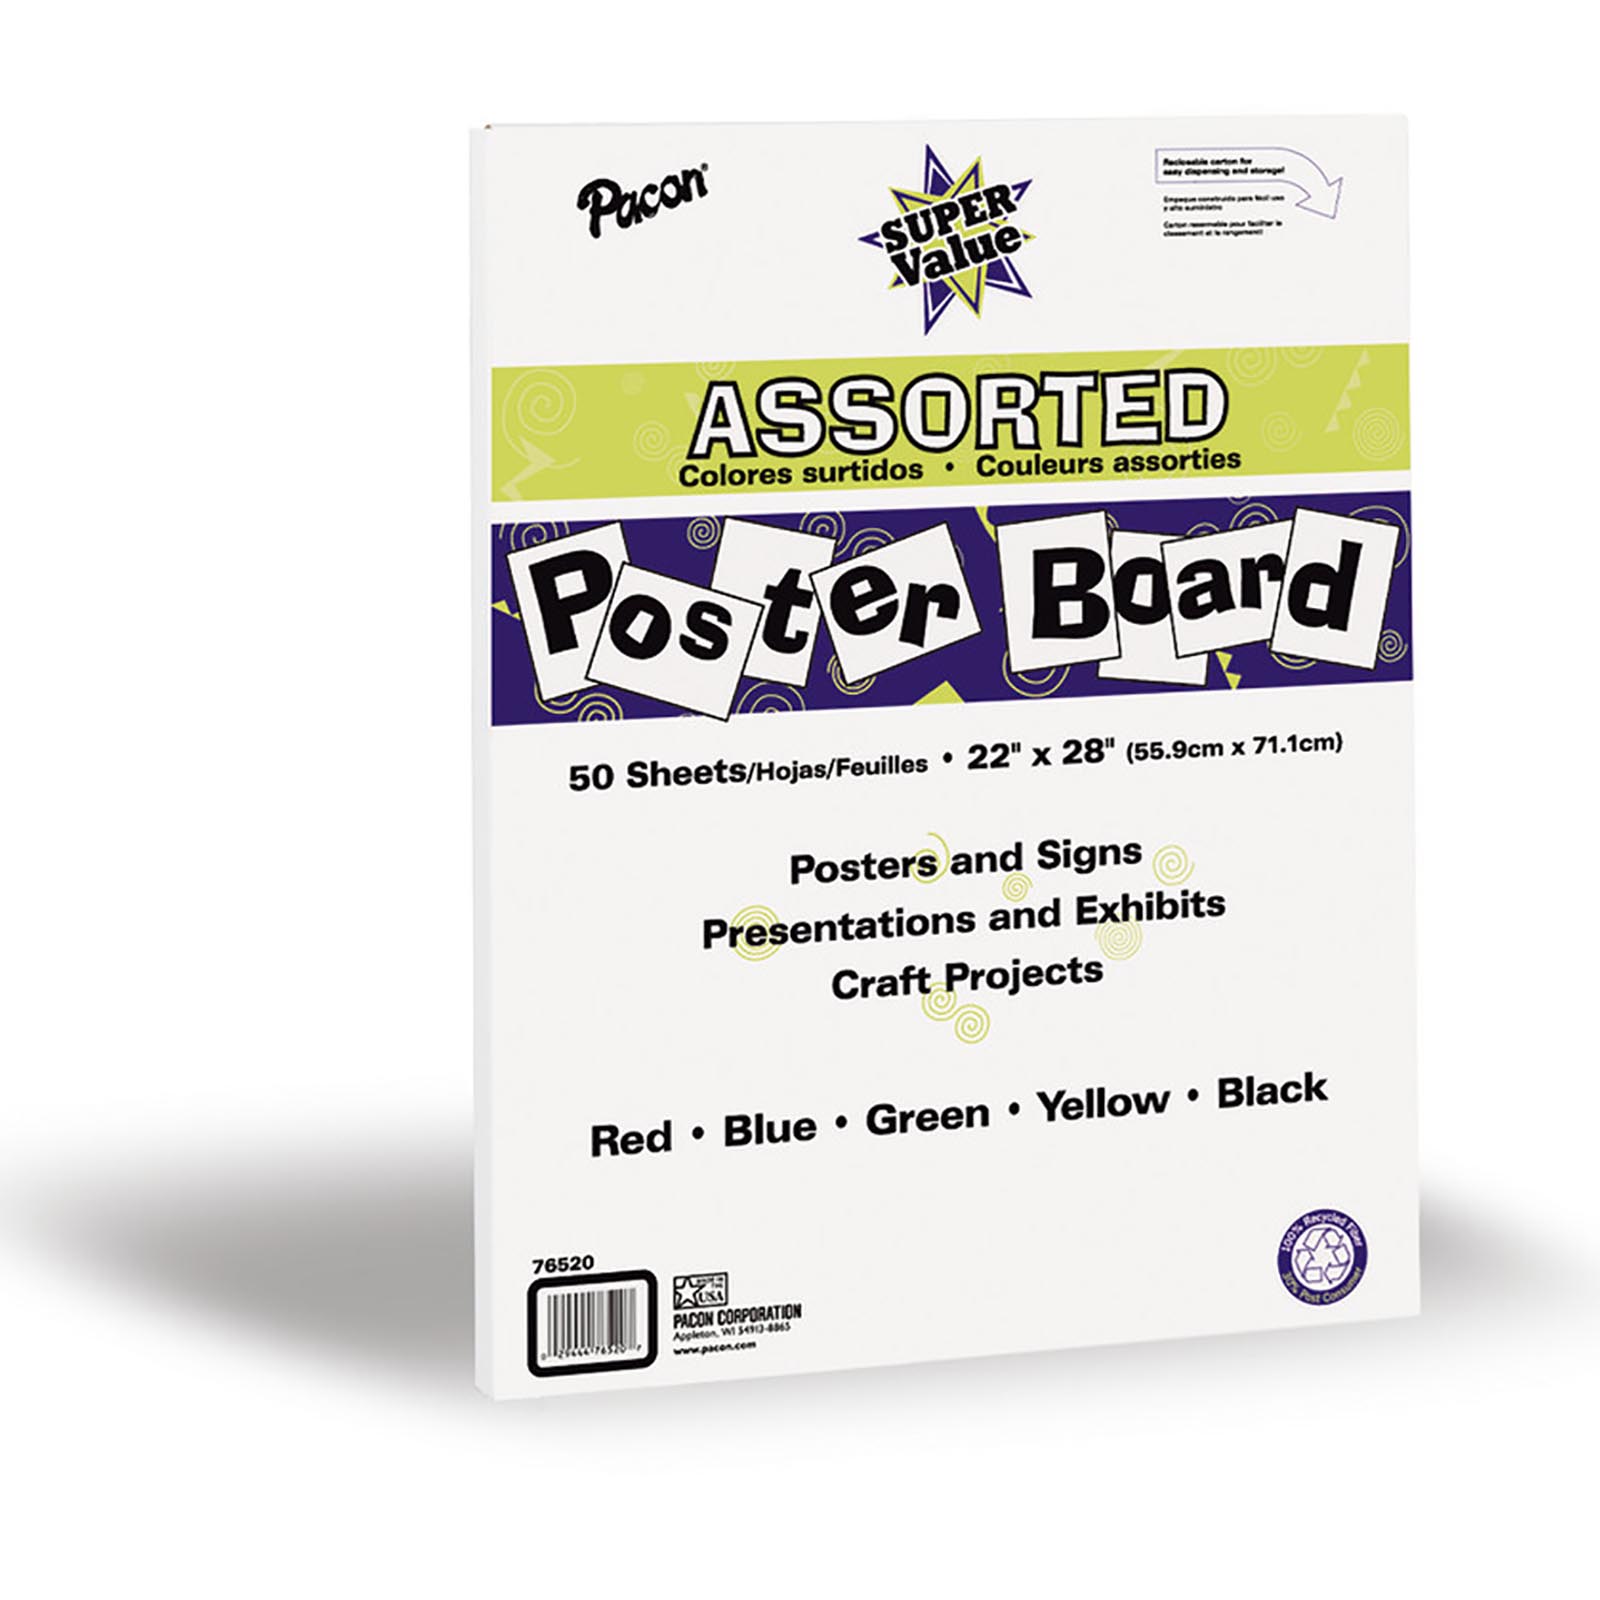 Pacon Super Value Poster Board, 22 x 28, Assorted Colors, 50